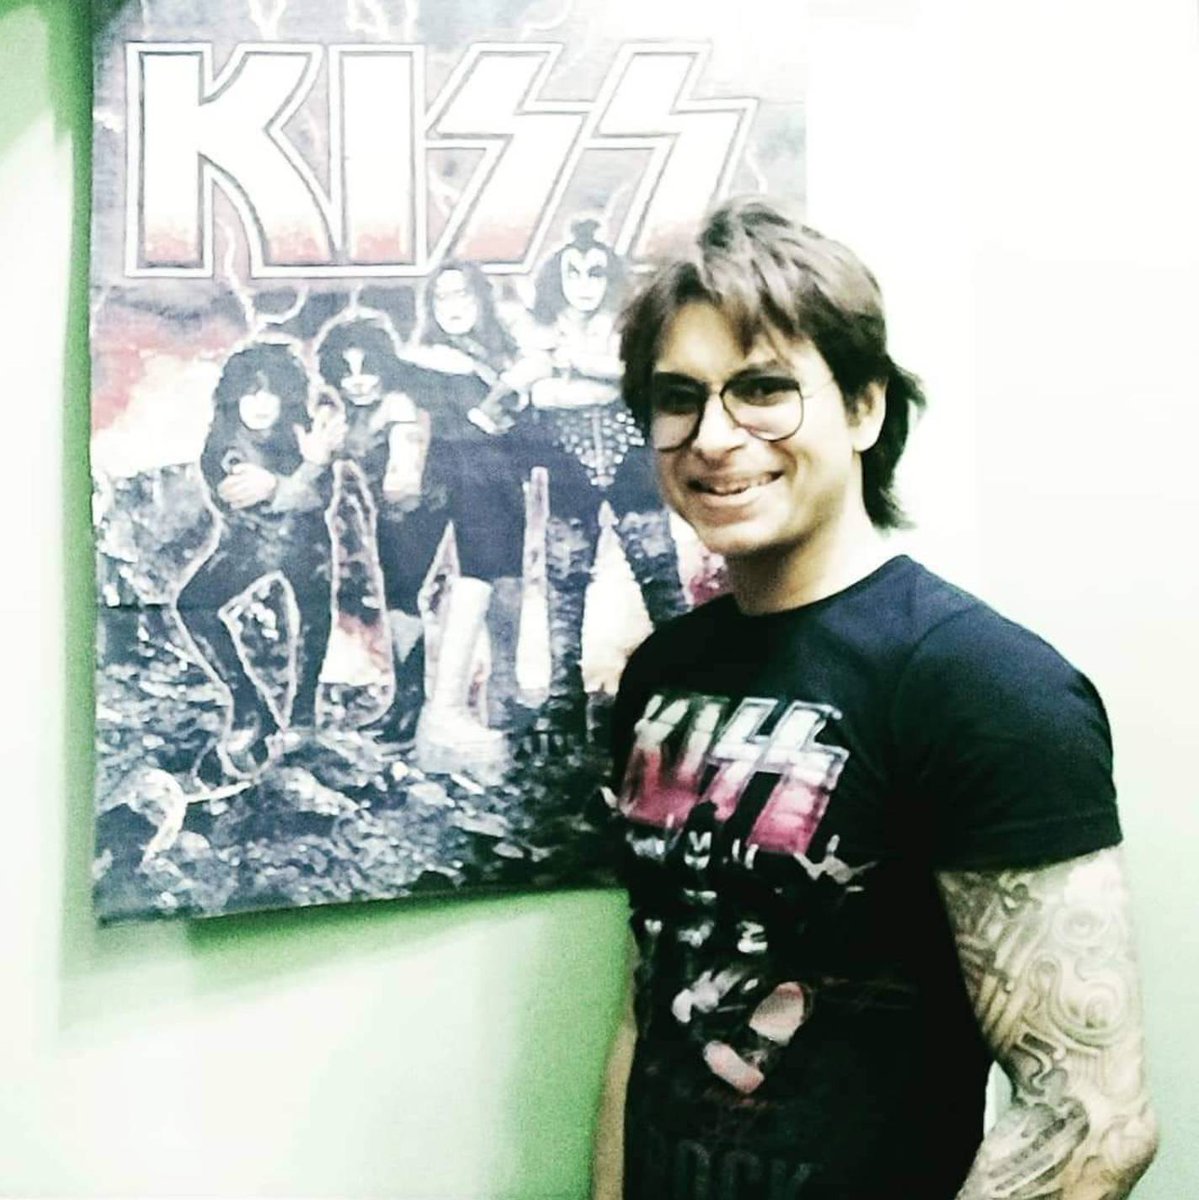 I wore a #KISStshirt to the studio today. And there on its wall, the first thing I saw was a #KISSposter.

#VibrationalMatch?
Yes, that's what I would call it.

So what are you wearing today? 🙂🙃